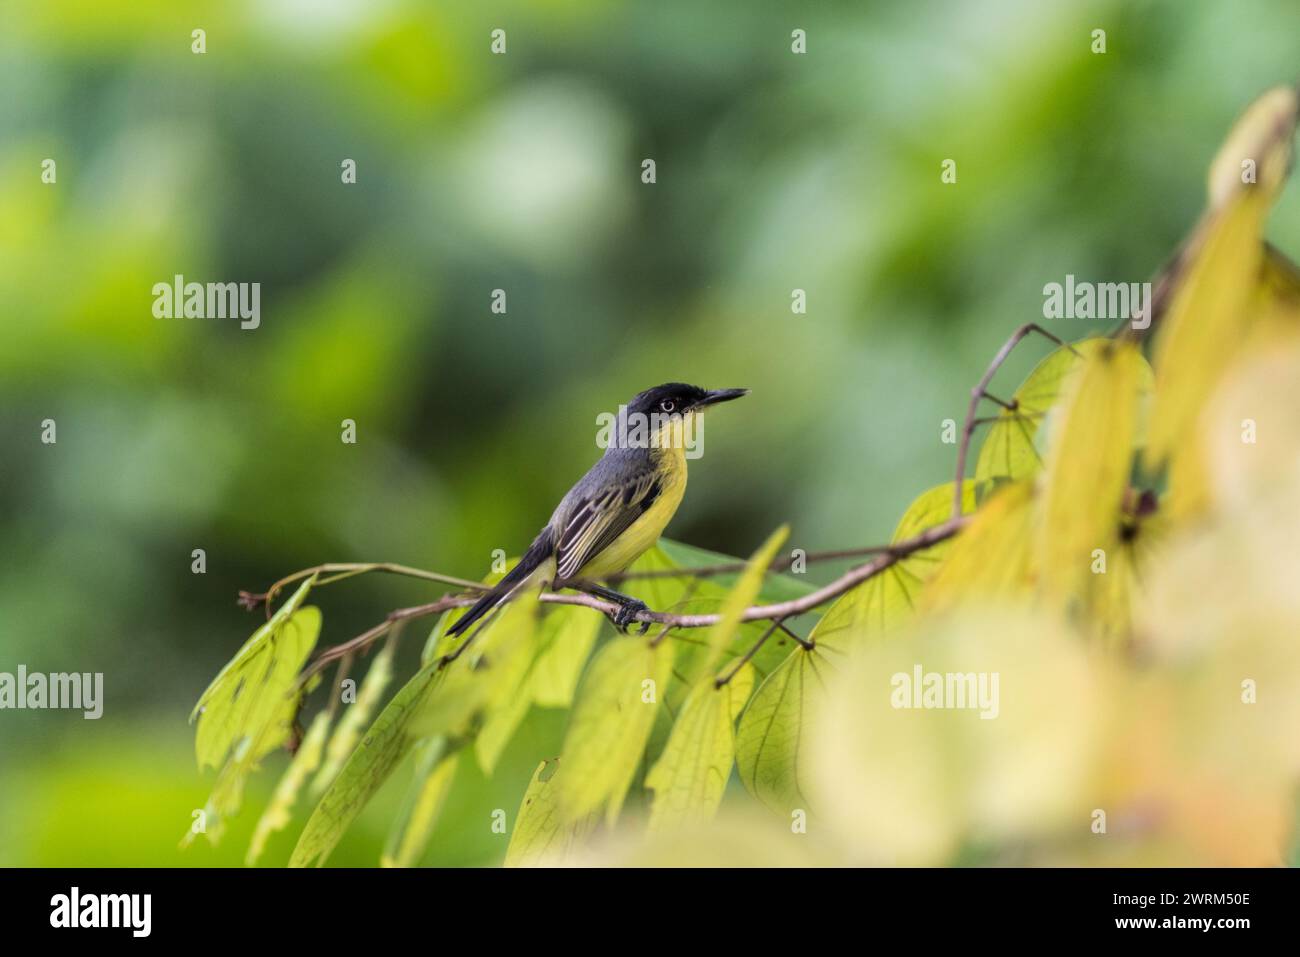 Common Tody-Flycatcher (Todirostrum cinereum) perched in a tree in Colombia Stock Photo